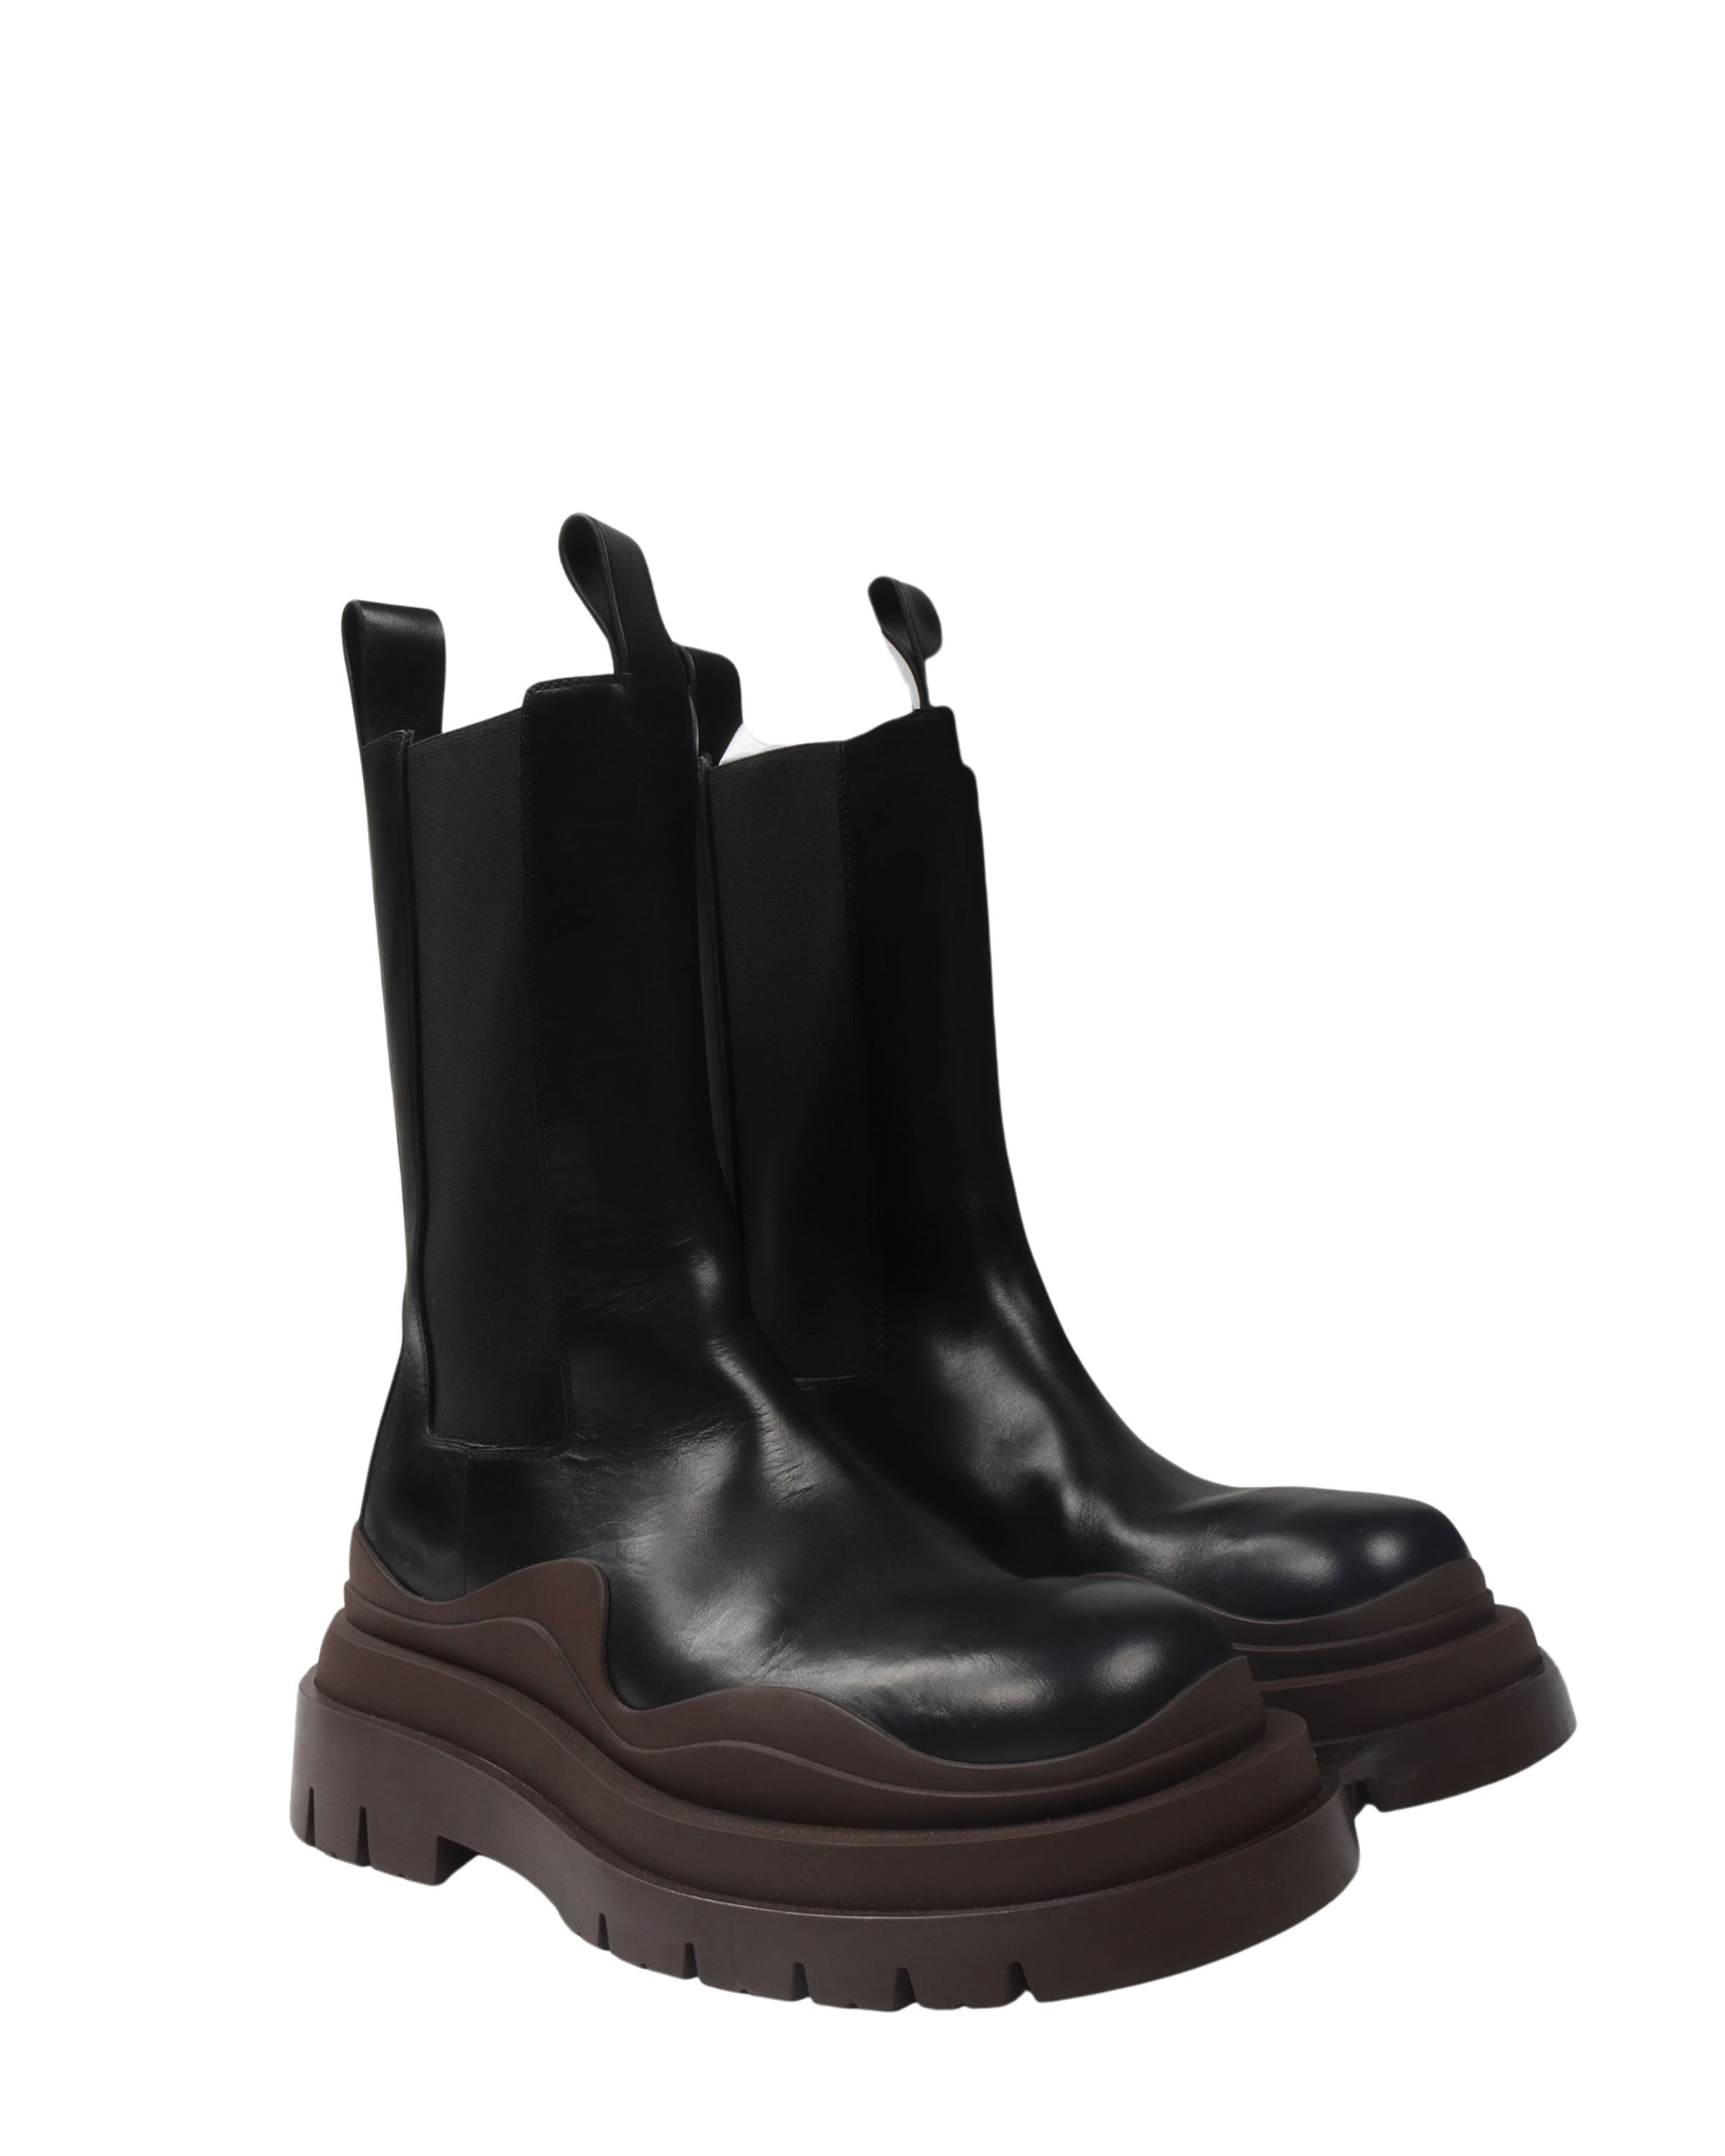 Leather Contrast Sole Tire Boots